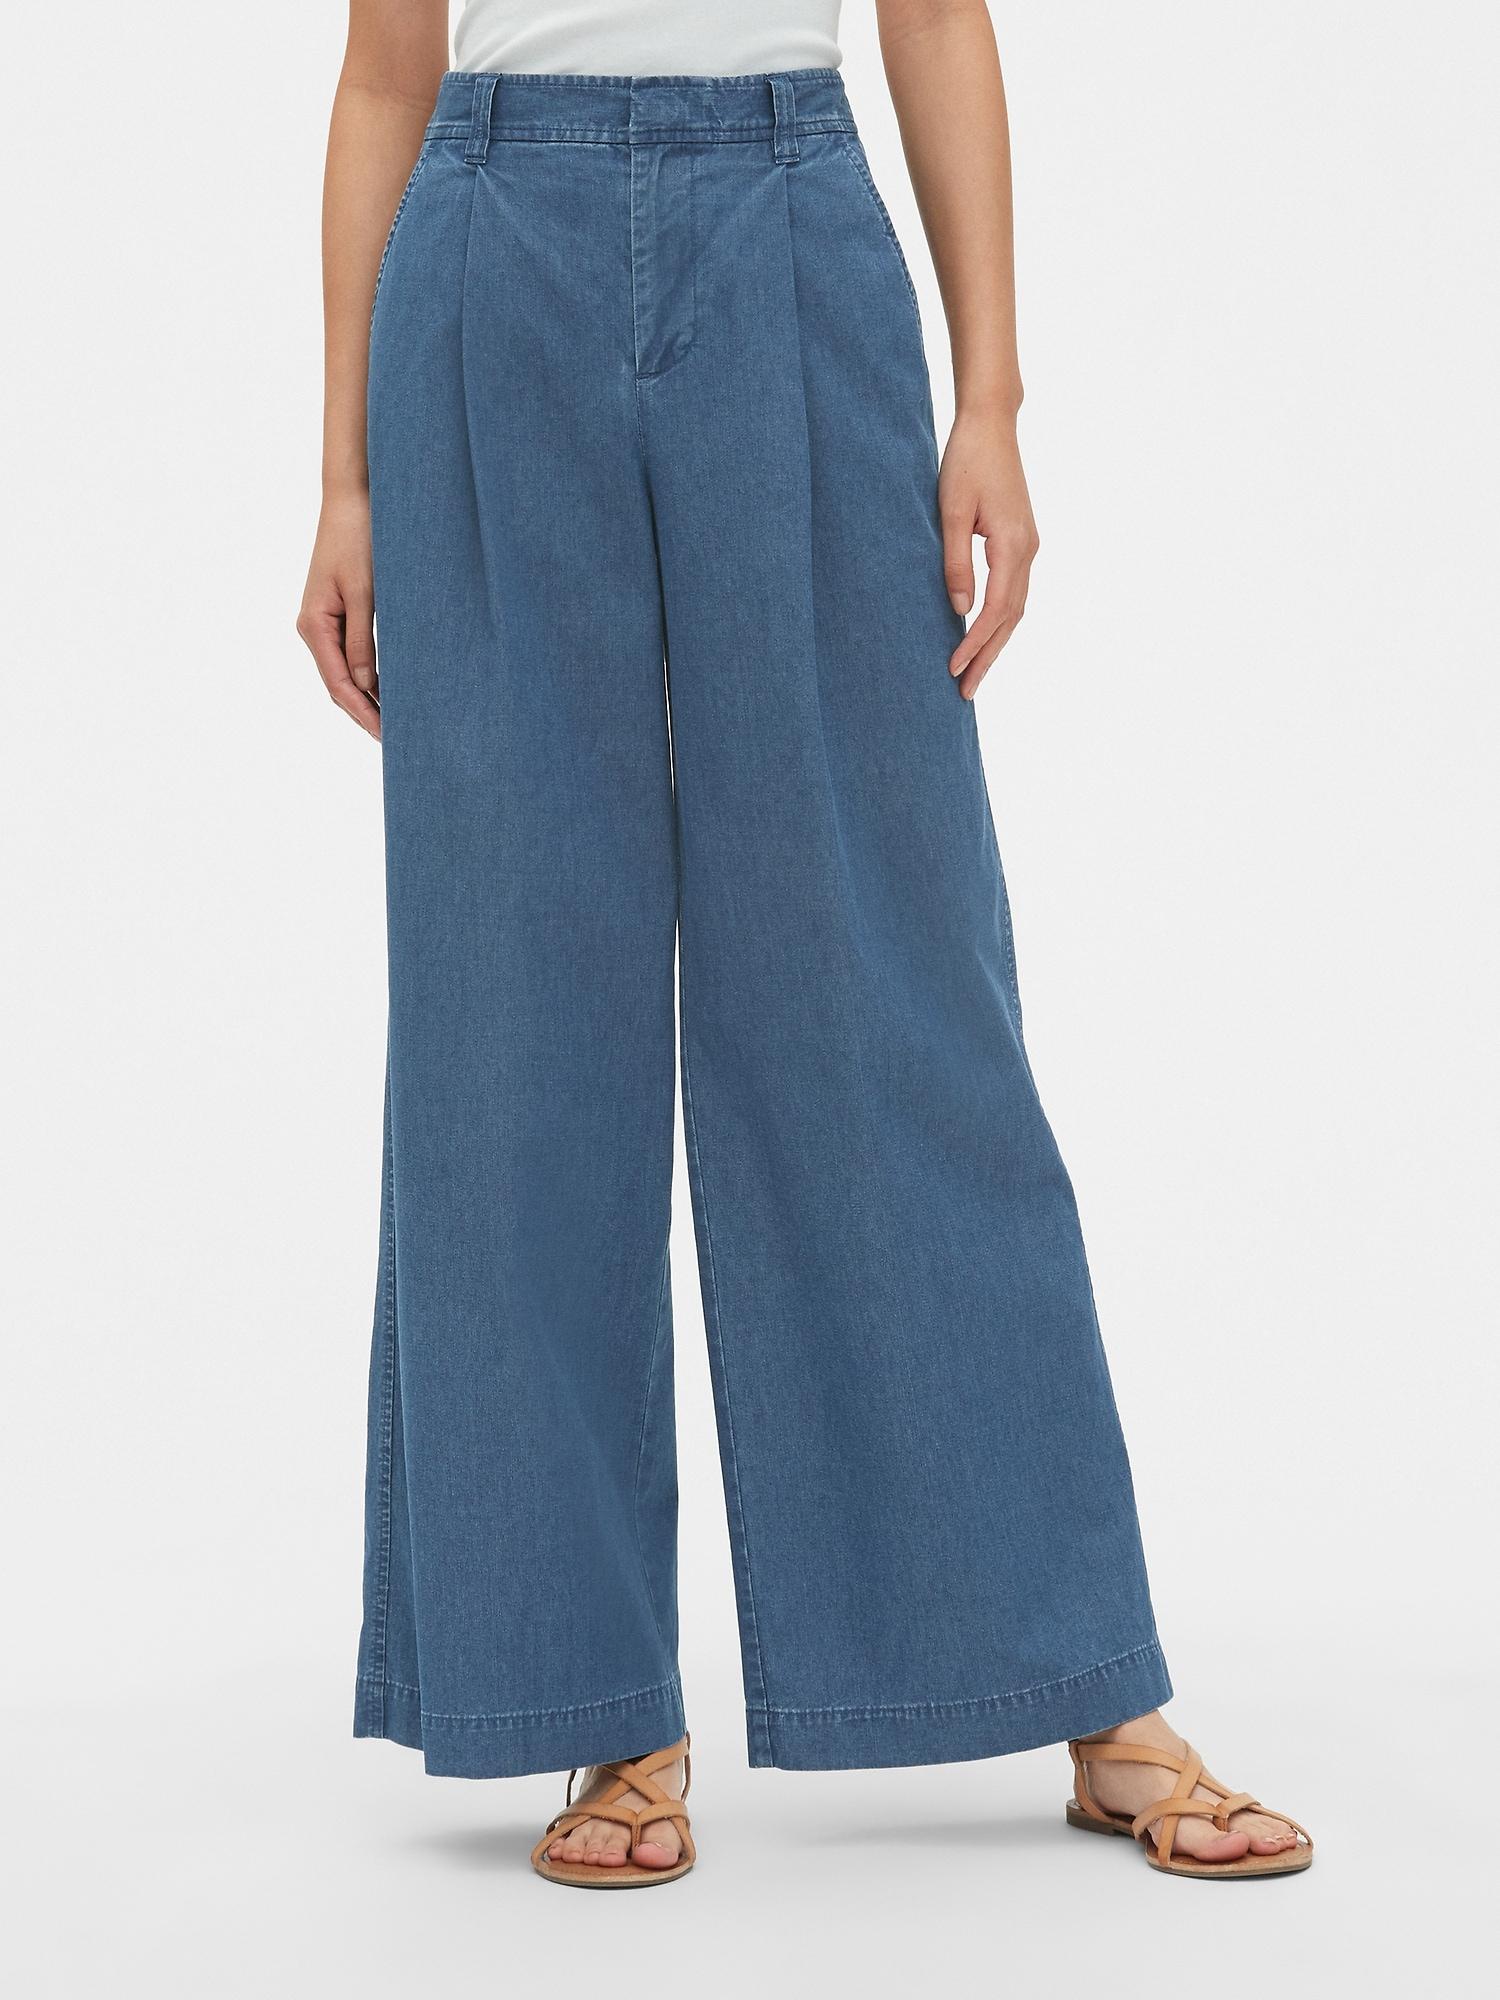 Lyst - Gap High Rise Pleated Wide-leg Jeans in Blue